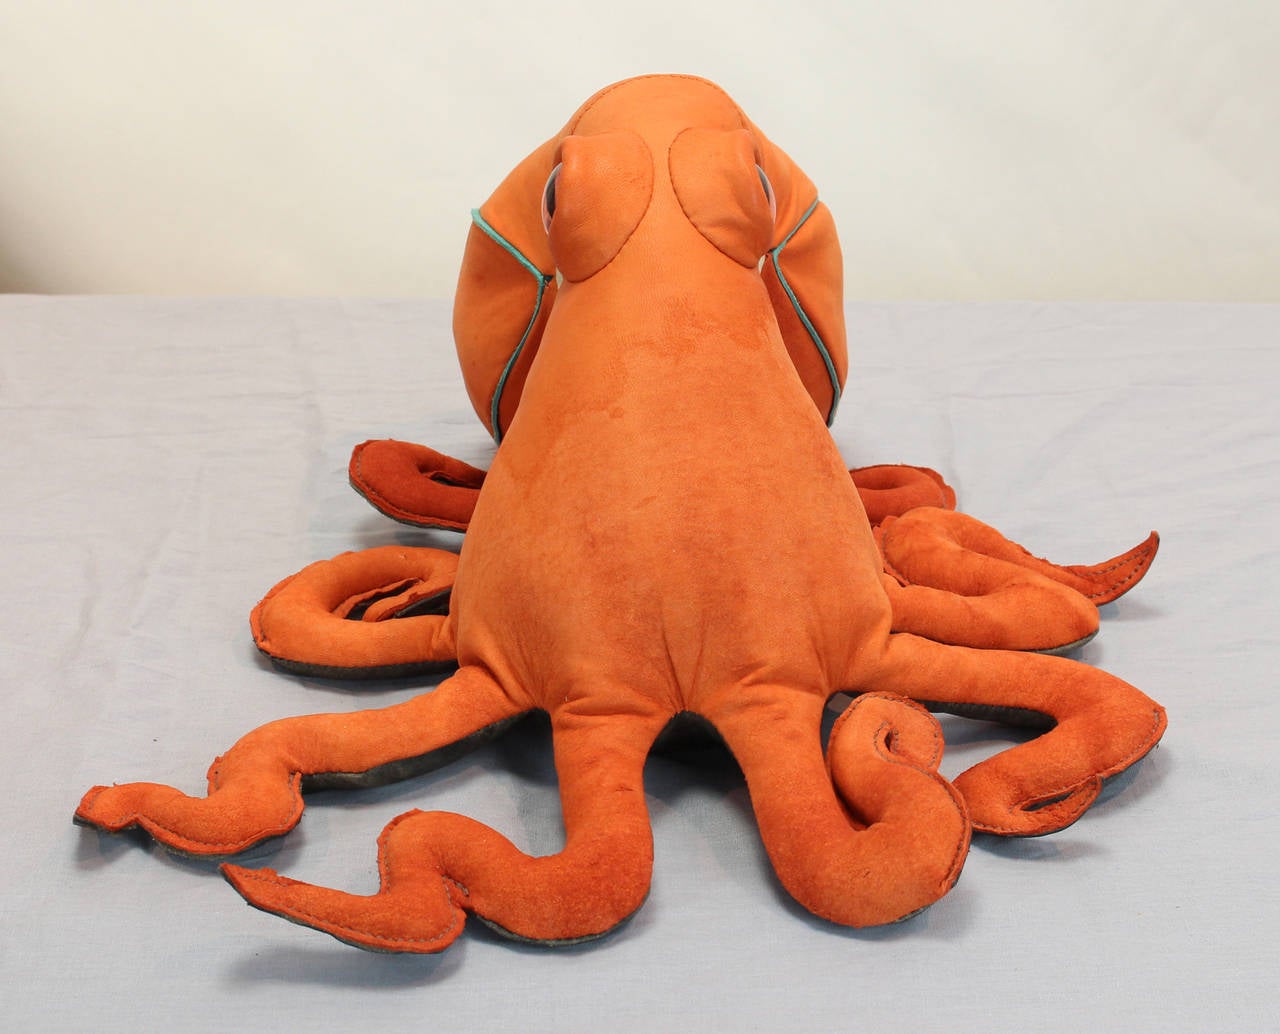 Dyed Whimsical Handmade Suede Octopus For Sale